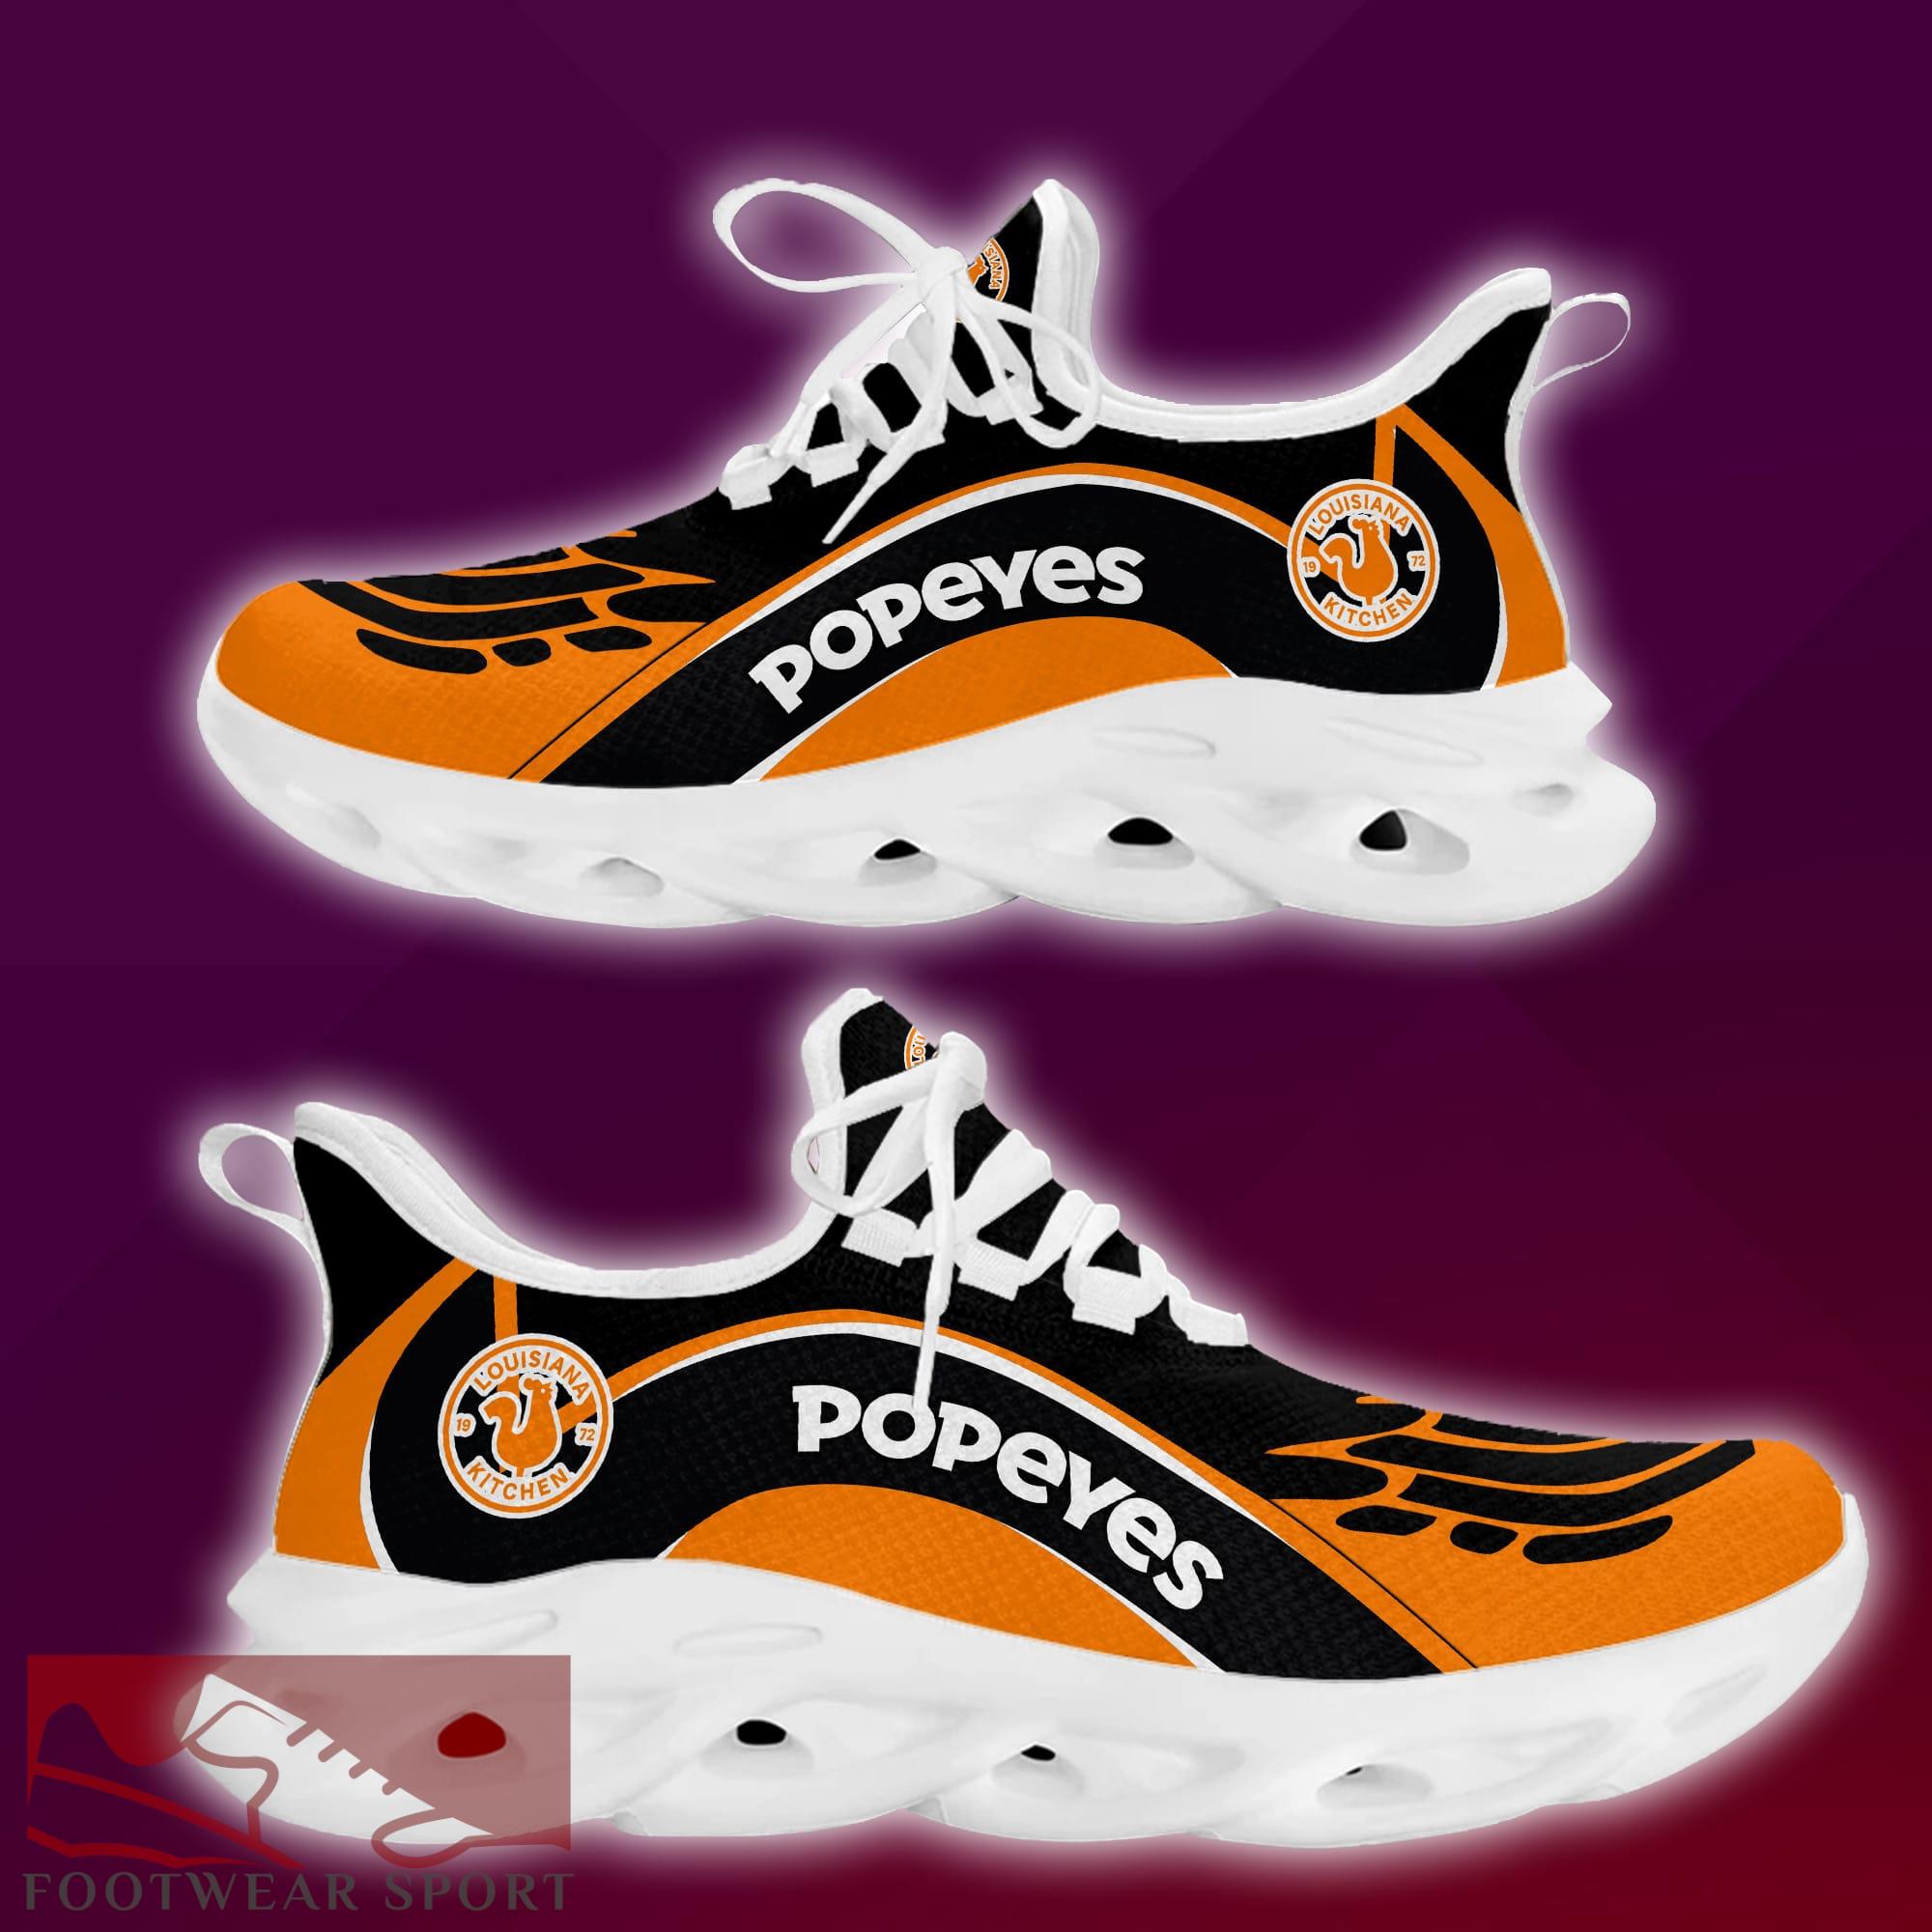 popeyes Brand New Logo Max Soul Sneakers Trendy Sport Shoes Gift - popeyes New Brand Chunky Shoes Style Max Soul Sneakers Photo 2